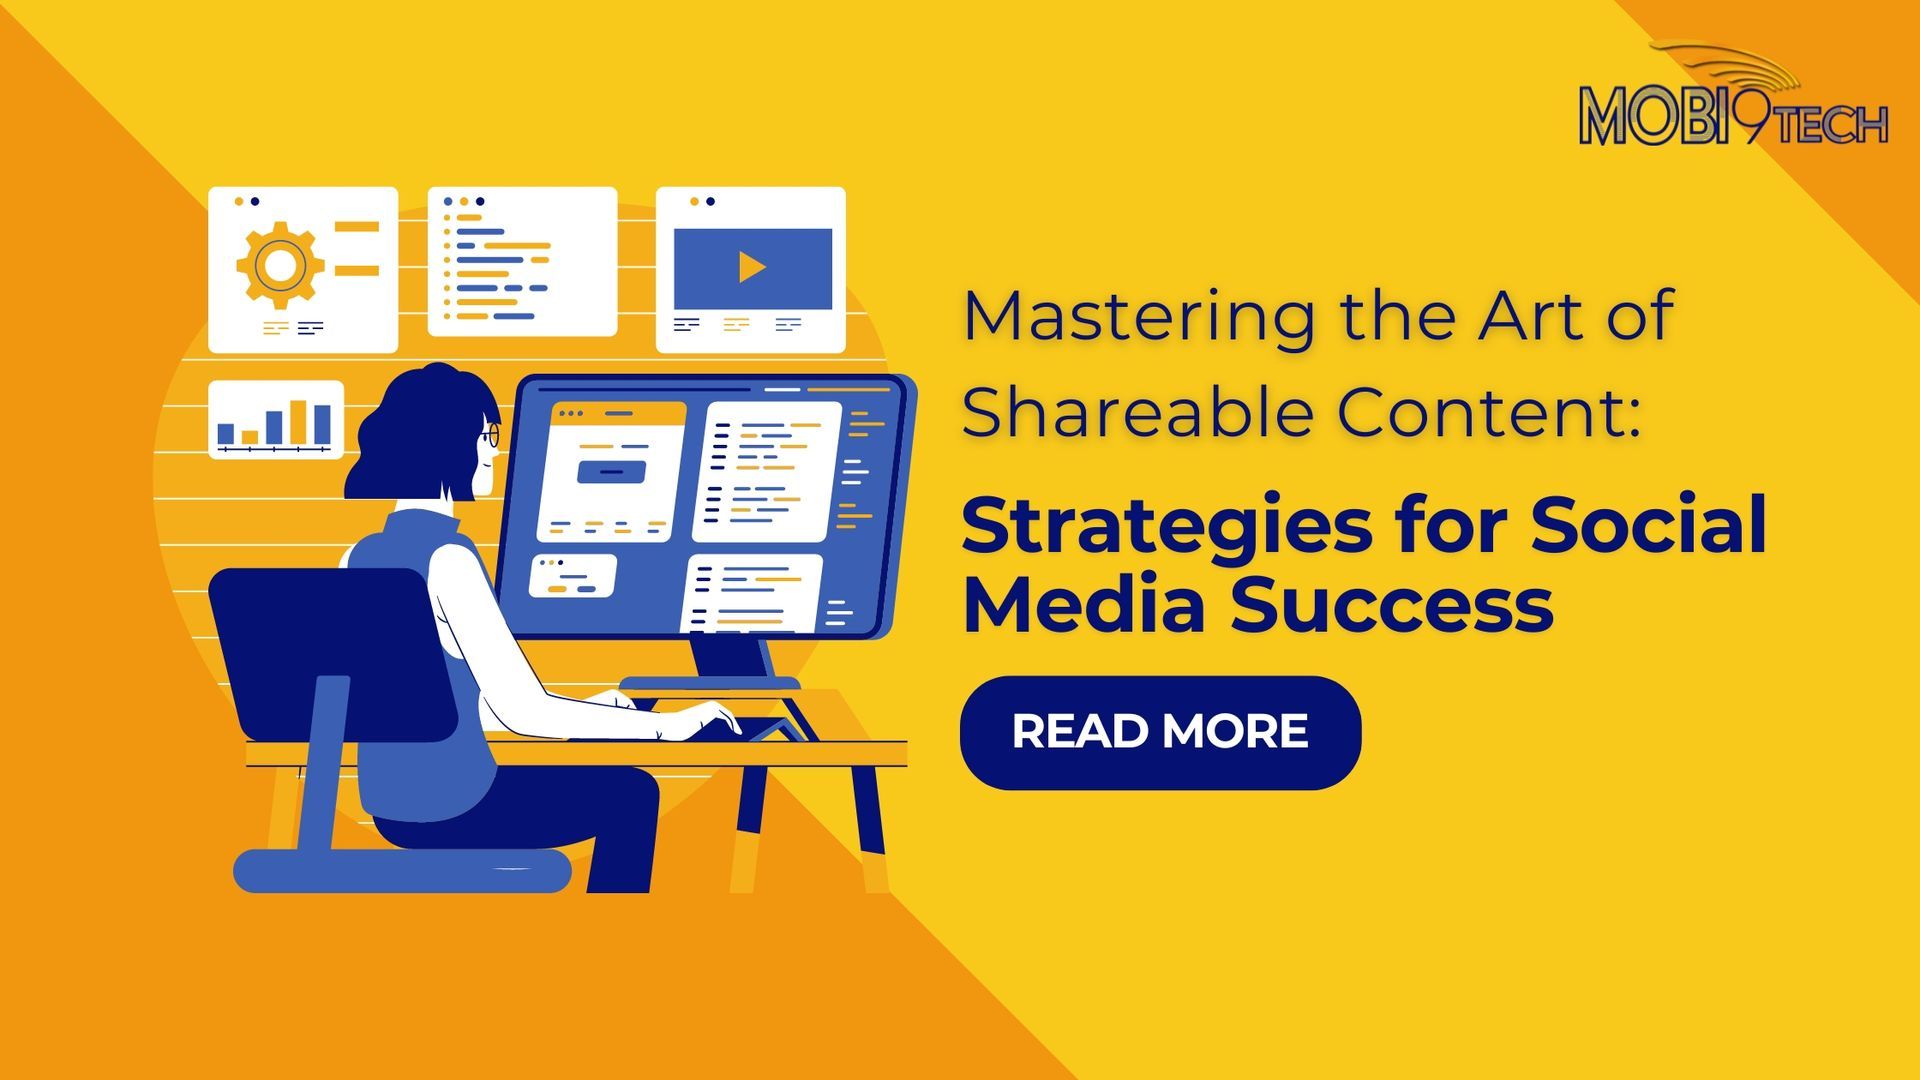 Mastering the Art of Shareable Content: Strategies for Social Media Success